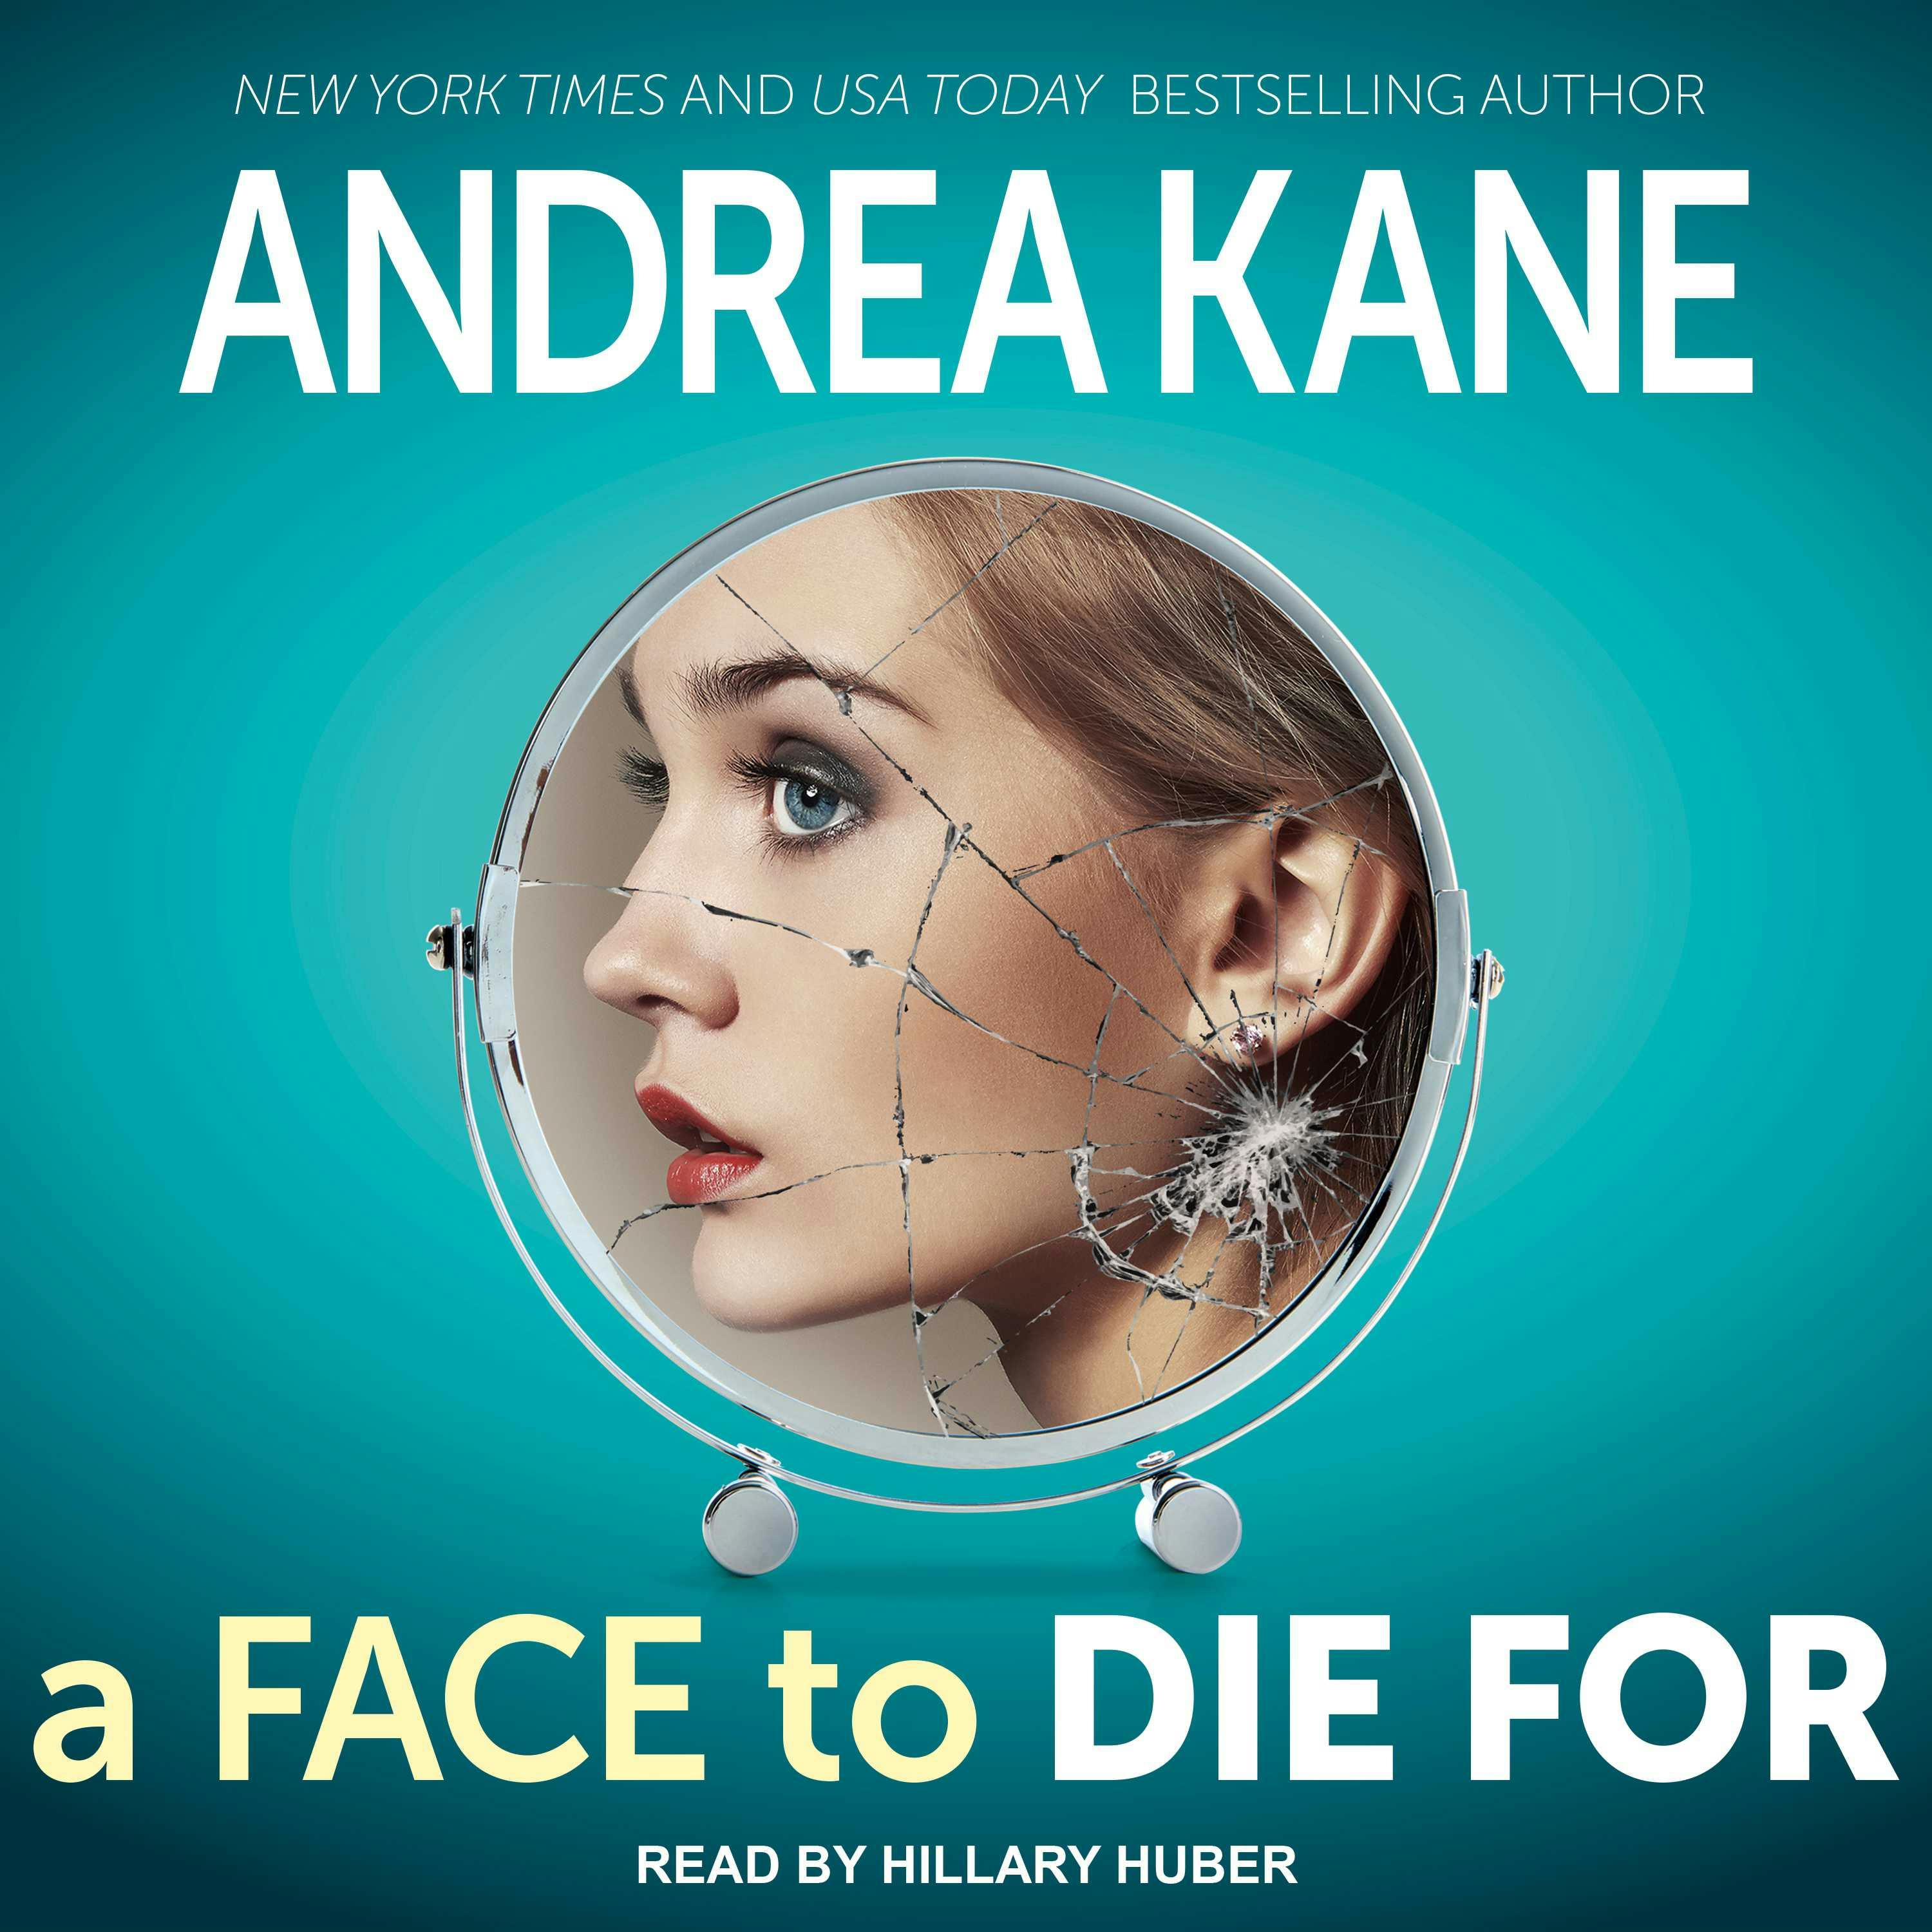 A Face to Die For - Andrea Kane